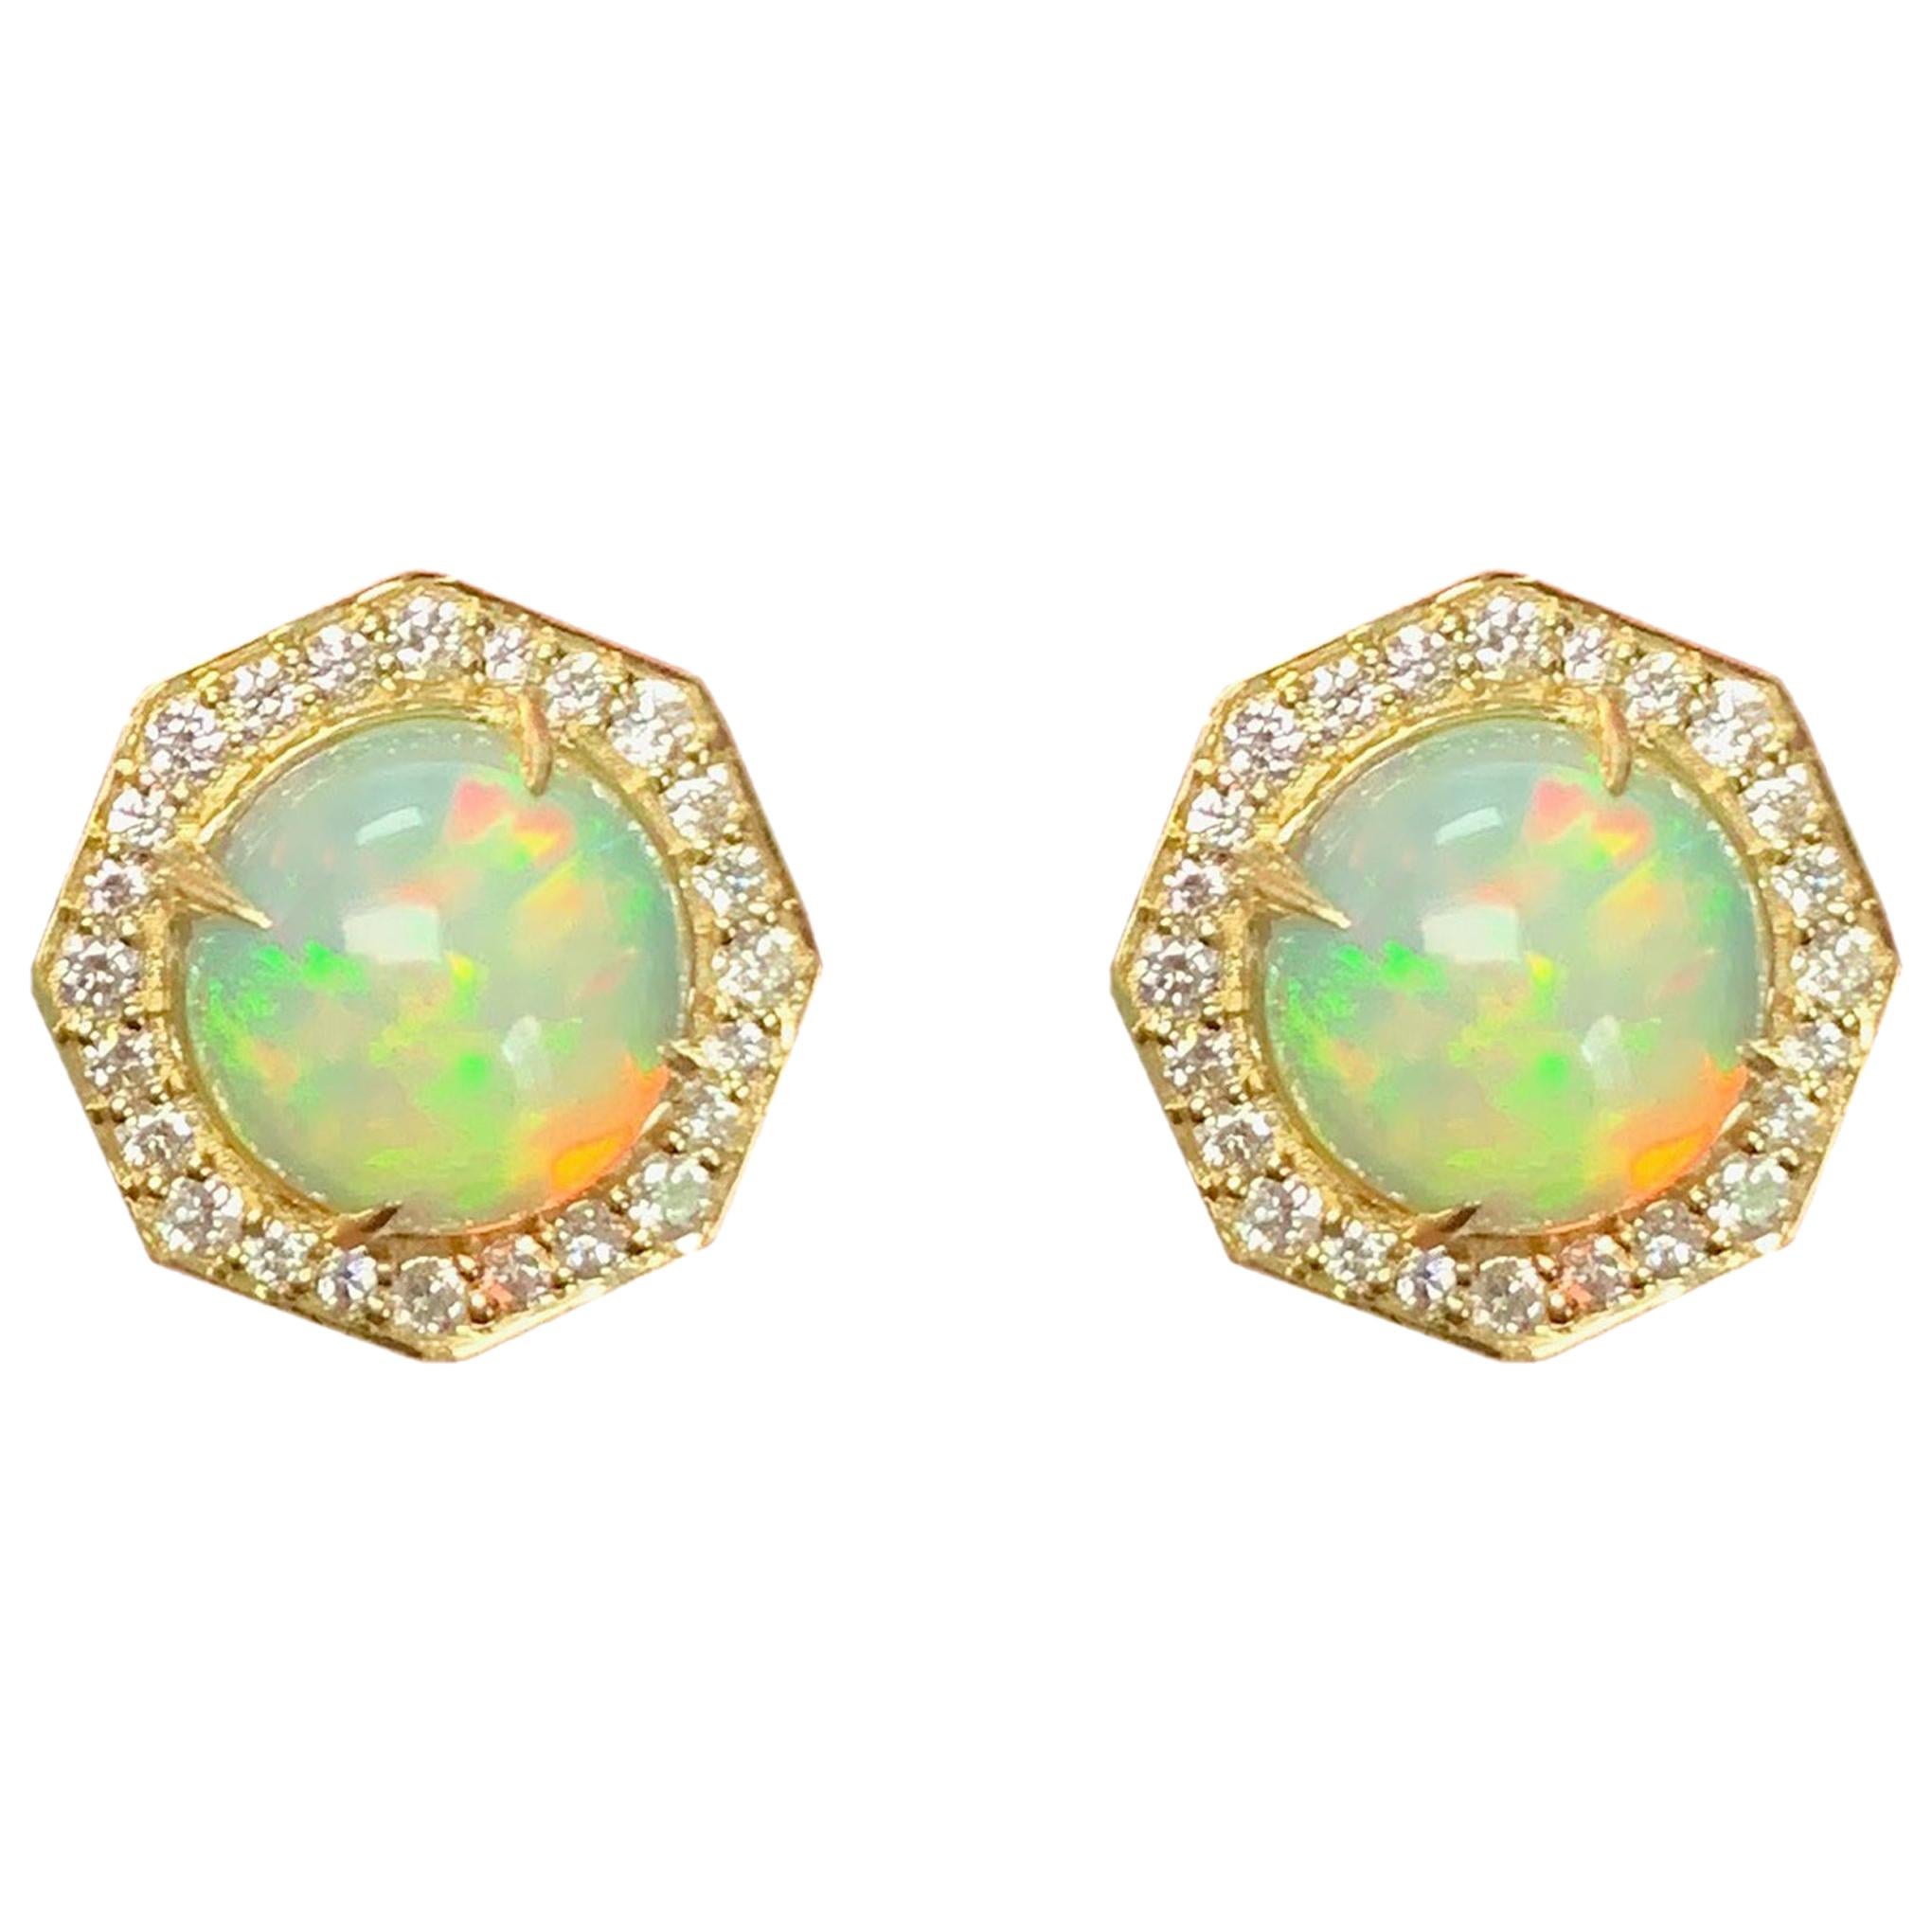 Contemporary Goshwara Opal And Diamond Stud Earrings For Sale